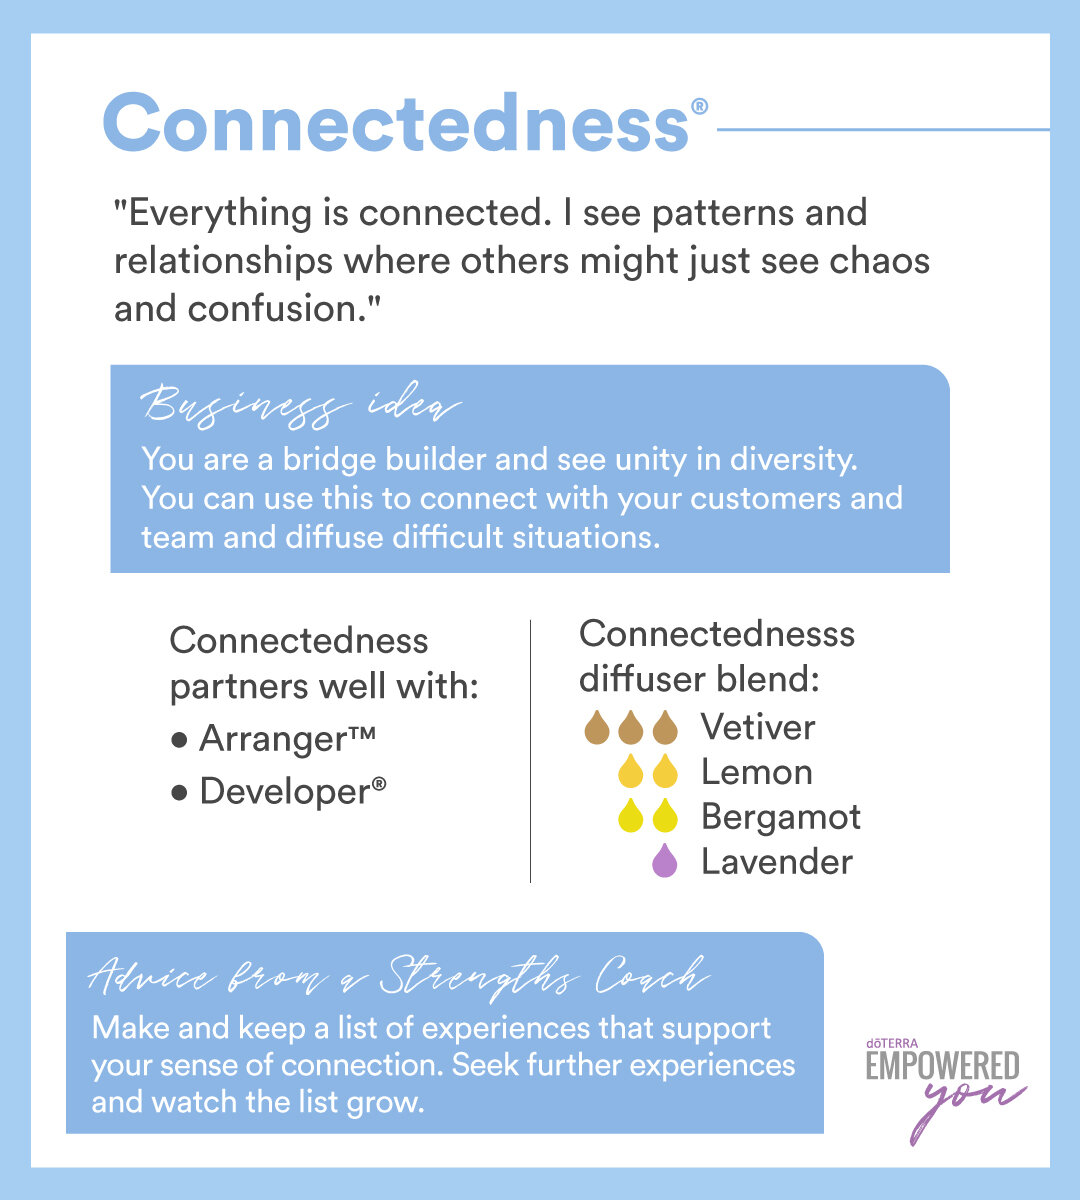 Strengths and oils-insight-Connectedness.jpg